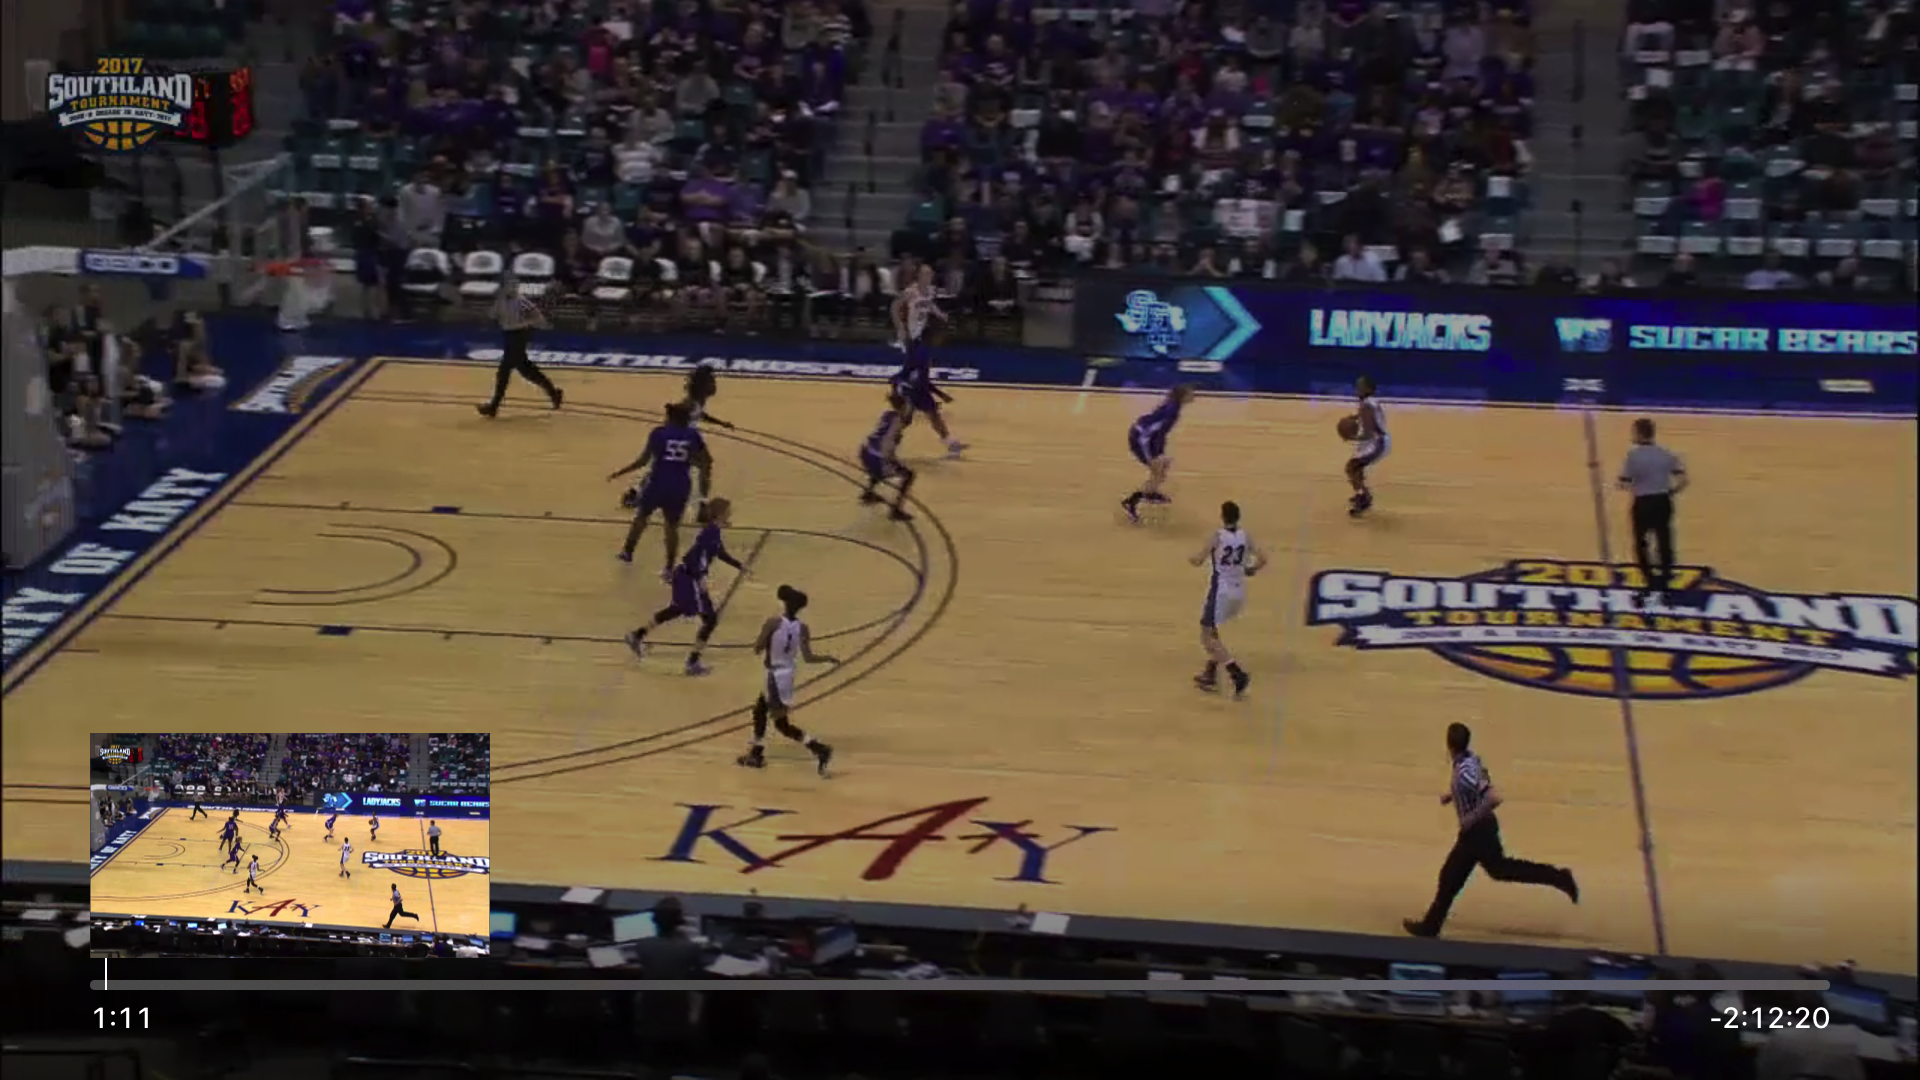 Southland Conference Network screenshot 2